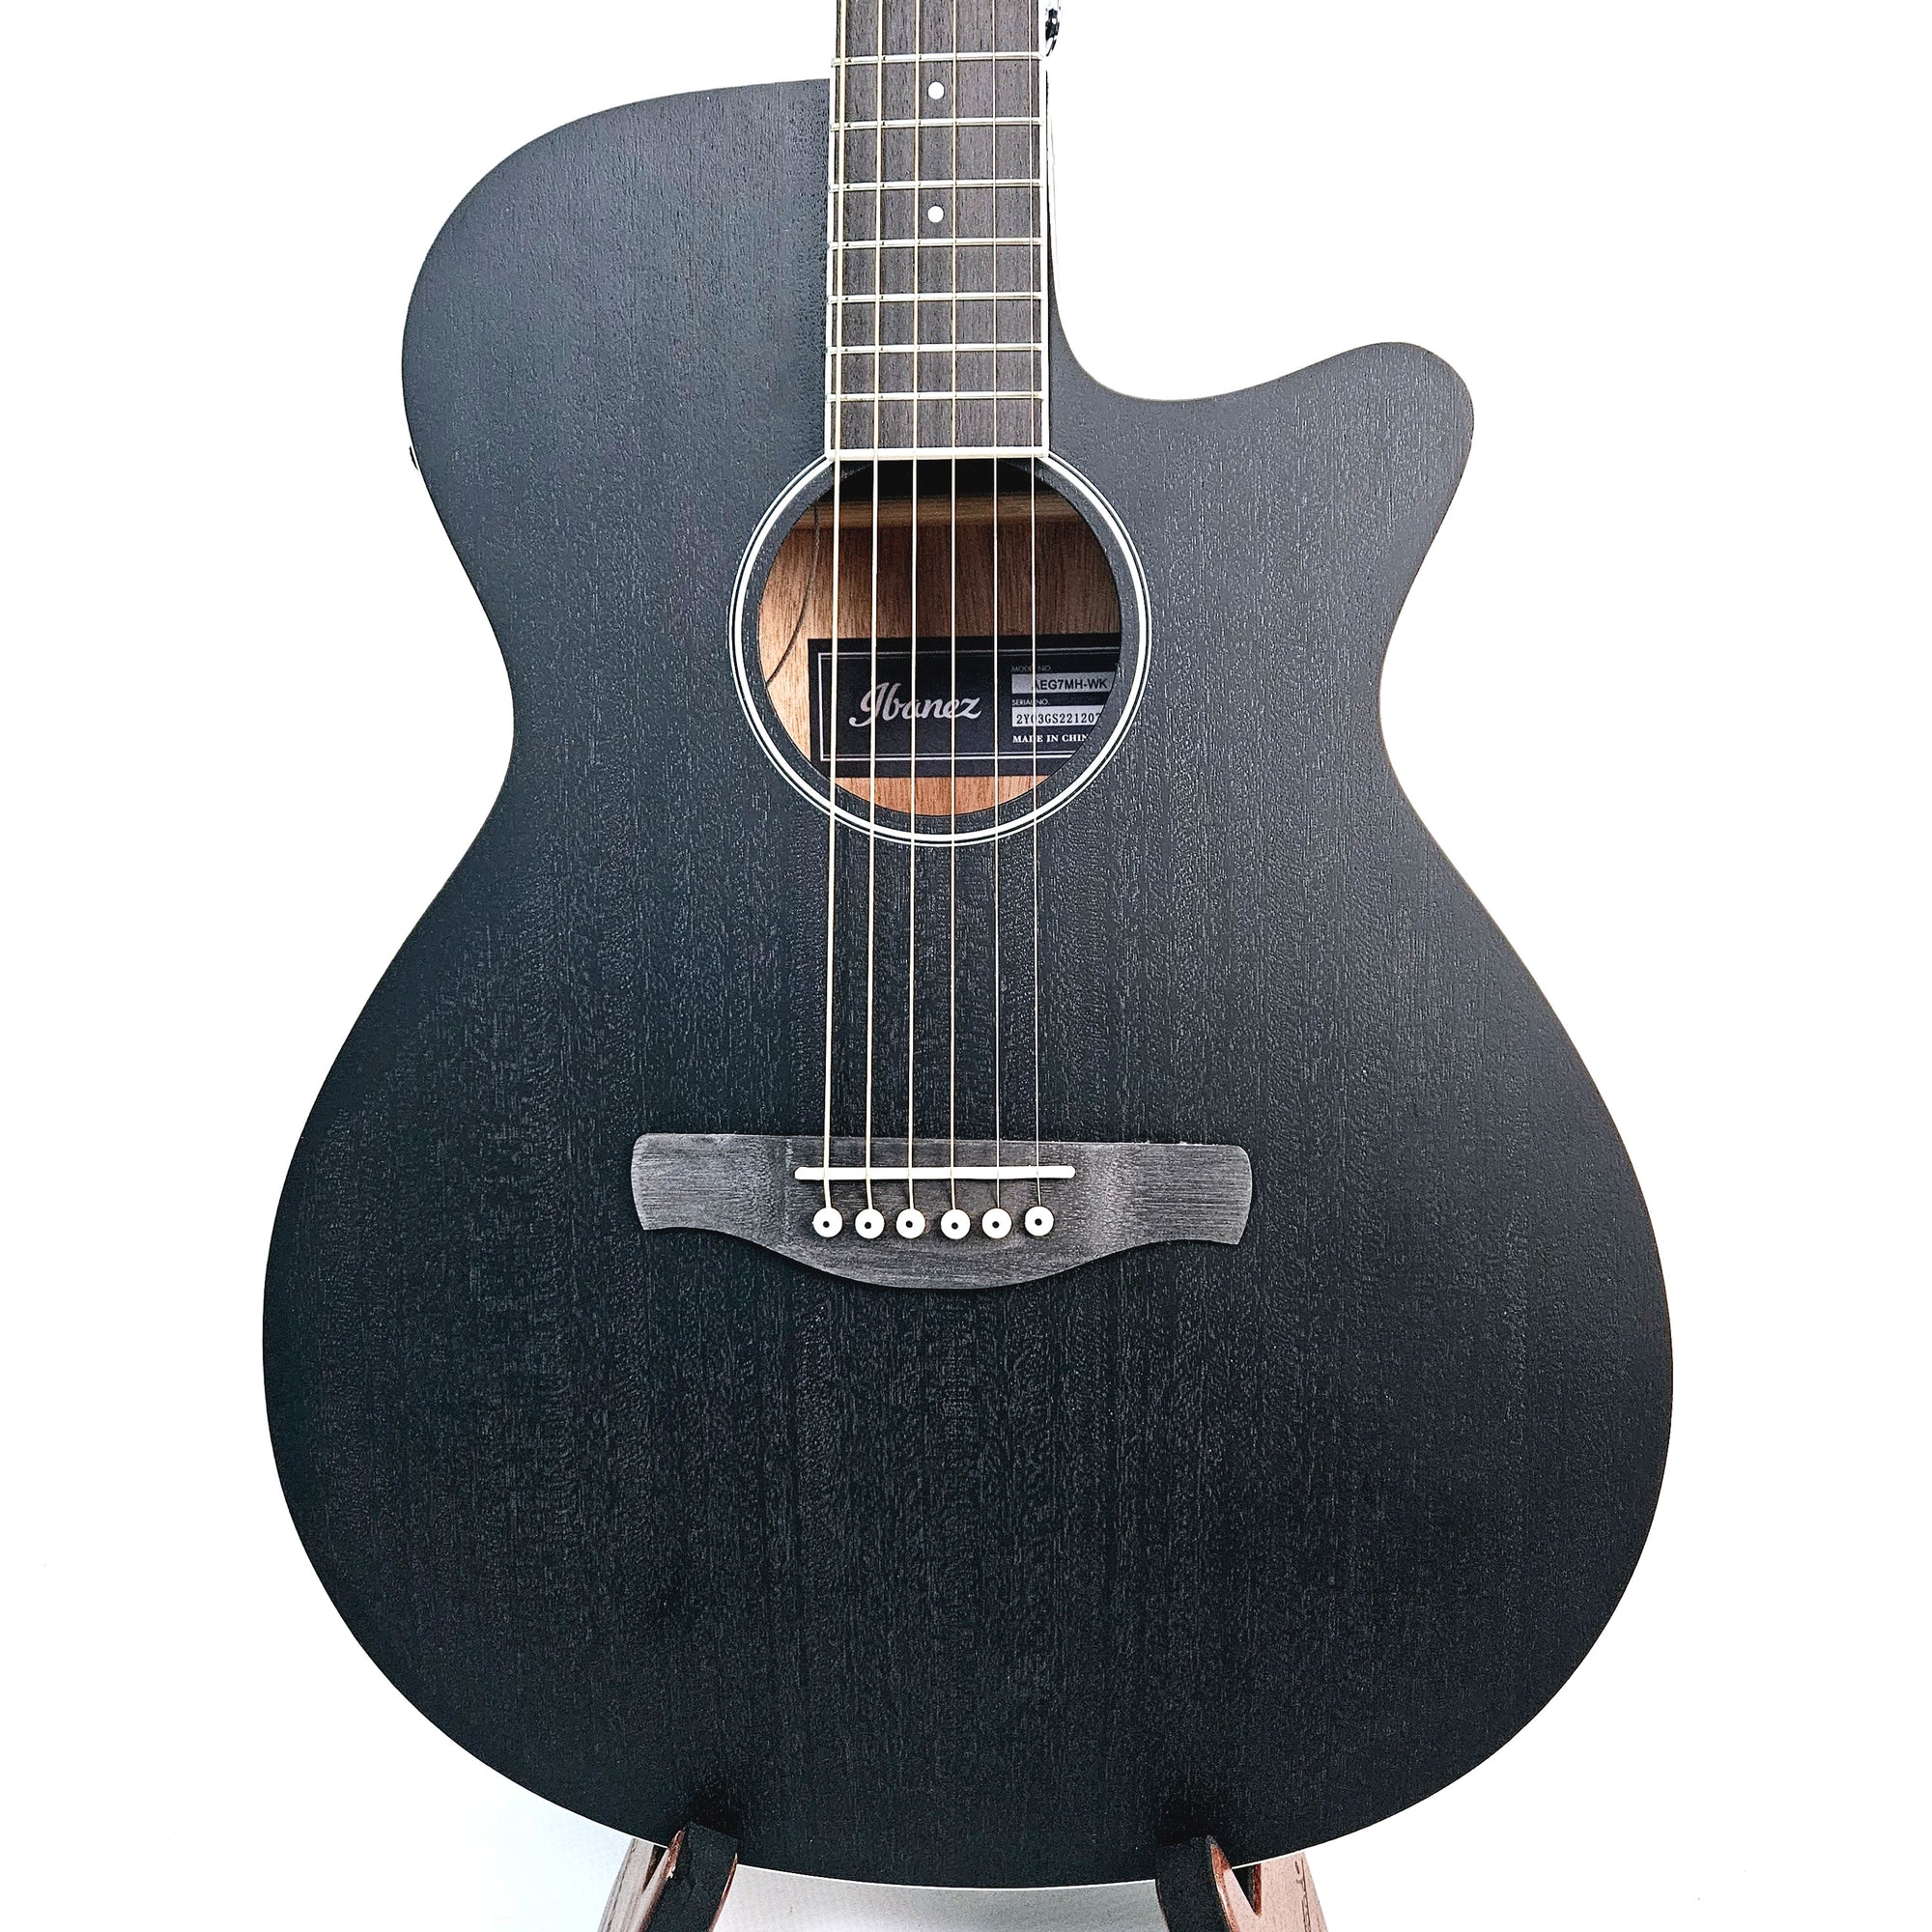 Ibanez Acoustic Electric Guitar - Weathered Black AEG7MHWK Body Front View